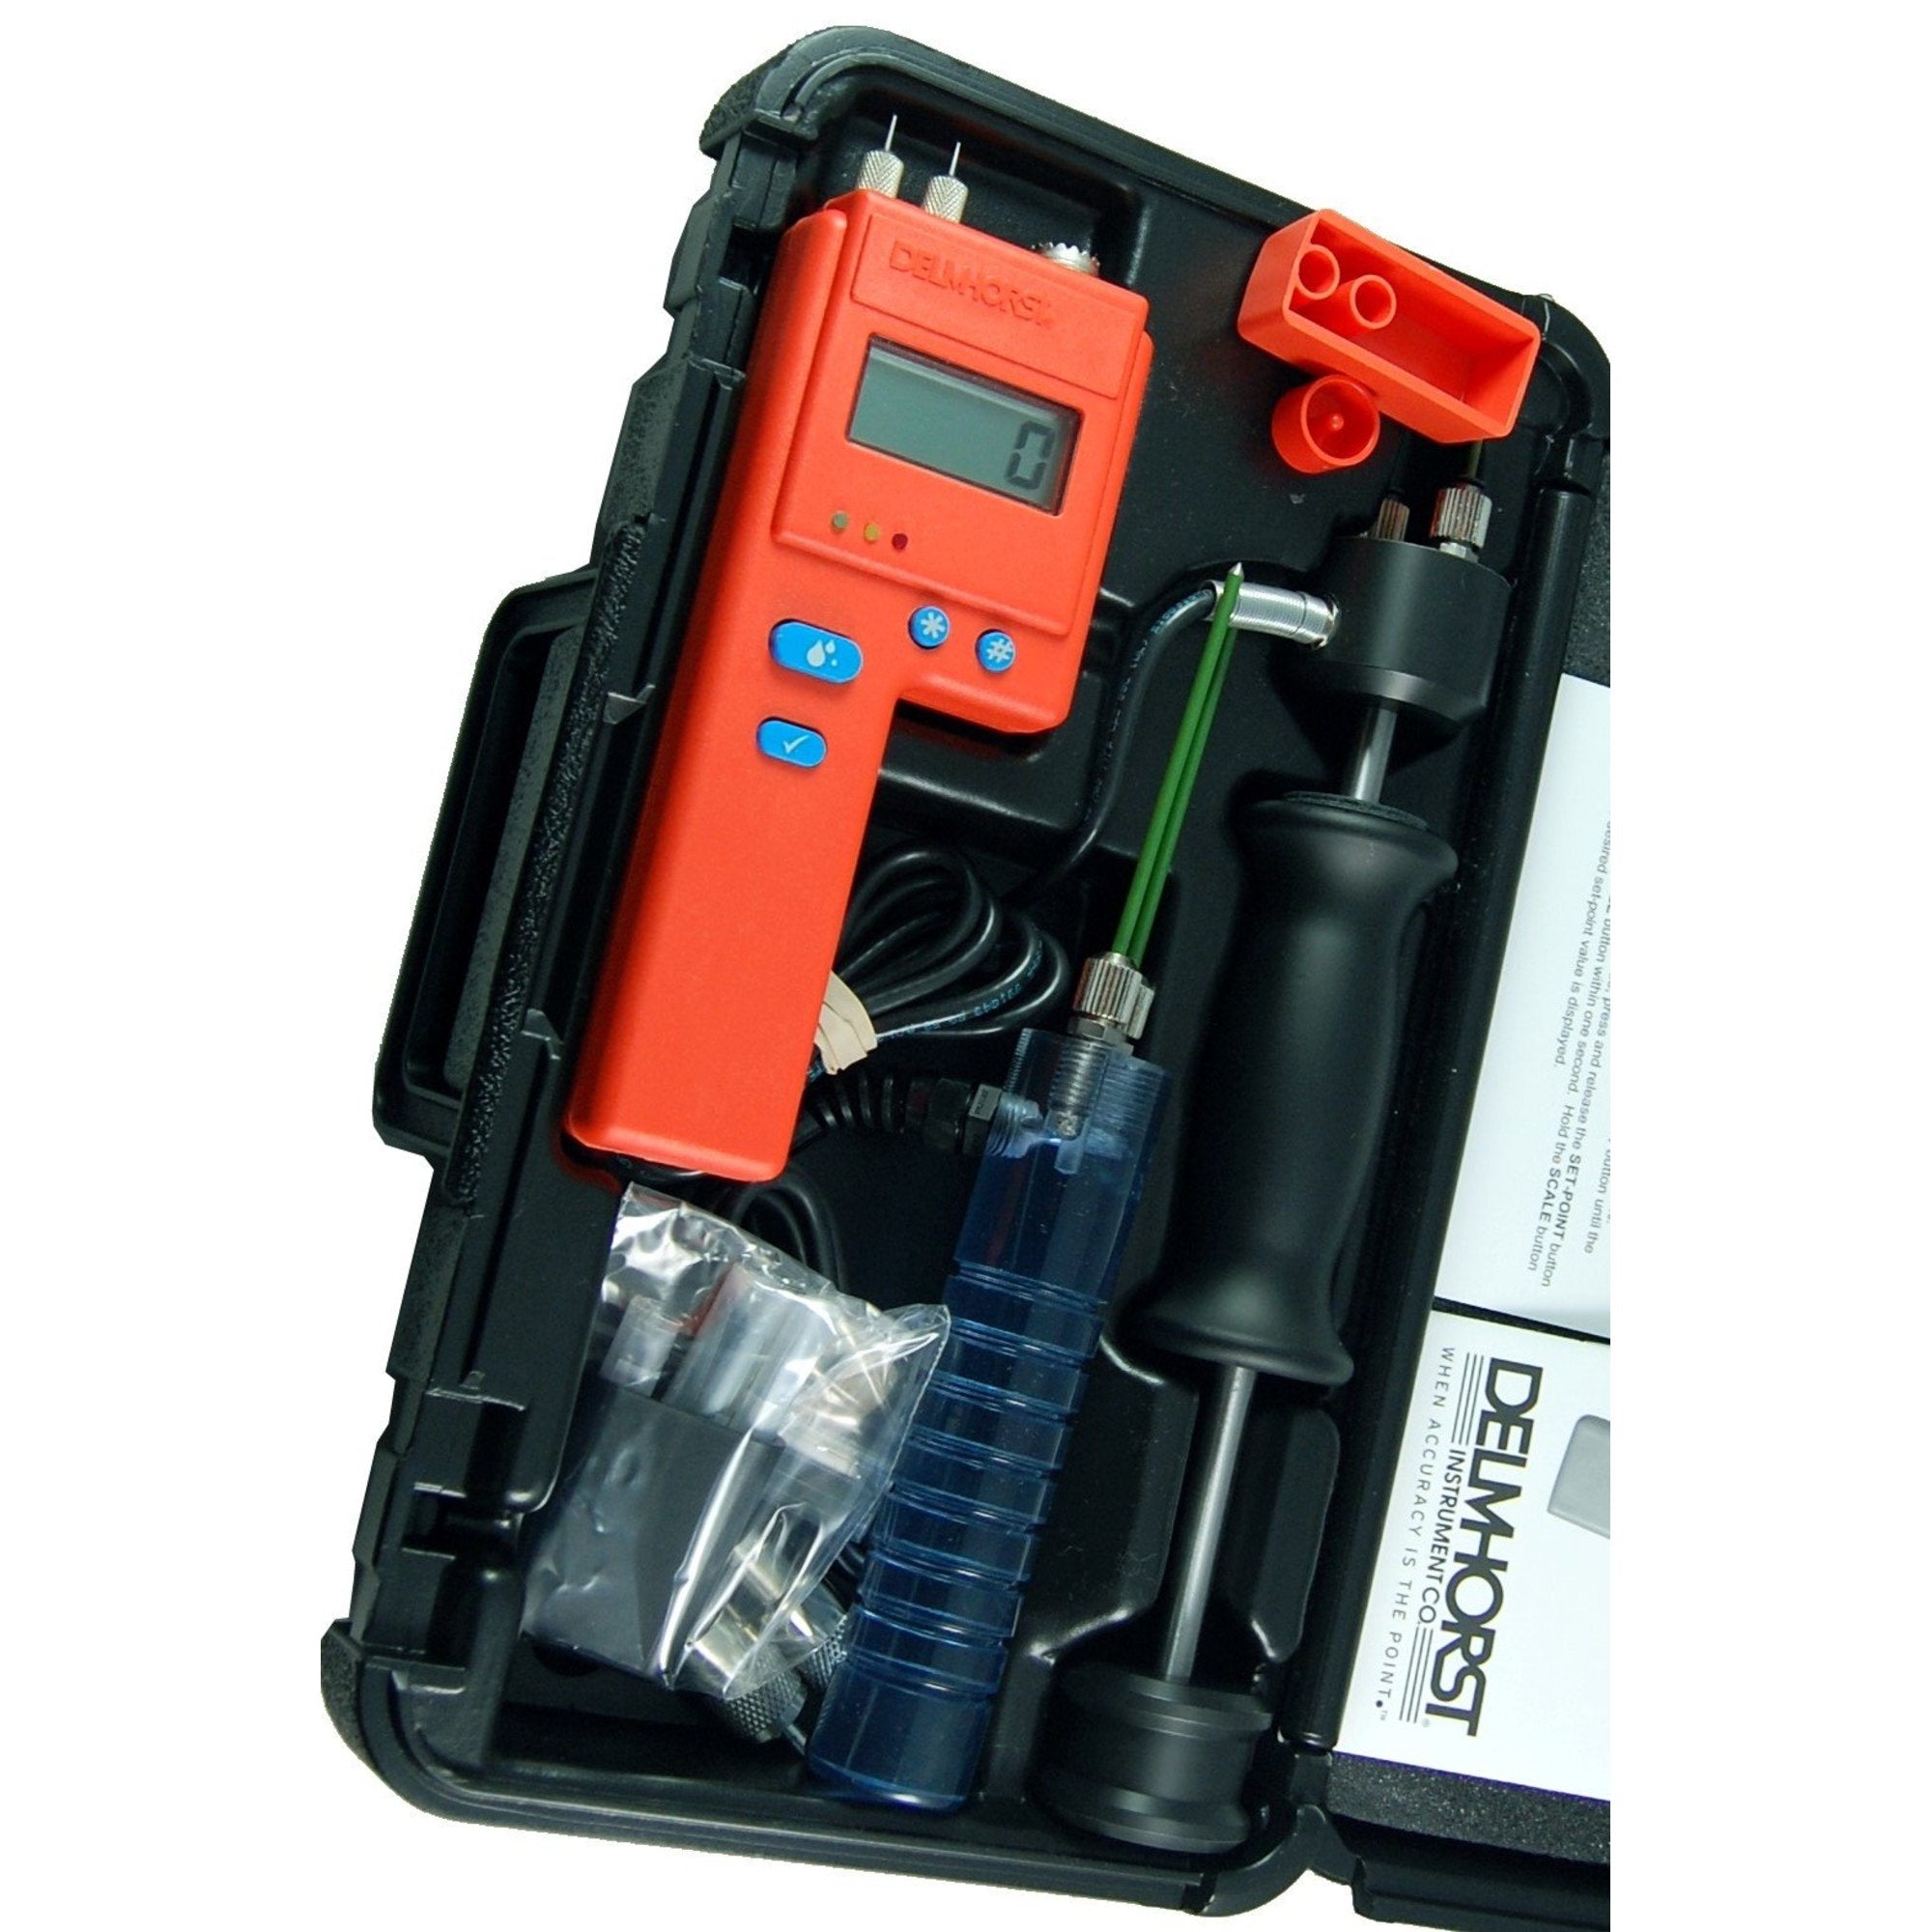 Buy Delmhorst BD-2100/26/21/PKG Digital Moisture Meter Kit with  324CAS-0066, 26-ES, 21-E, (10) 496 Pins at Prime Tools for only 690.00